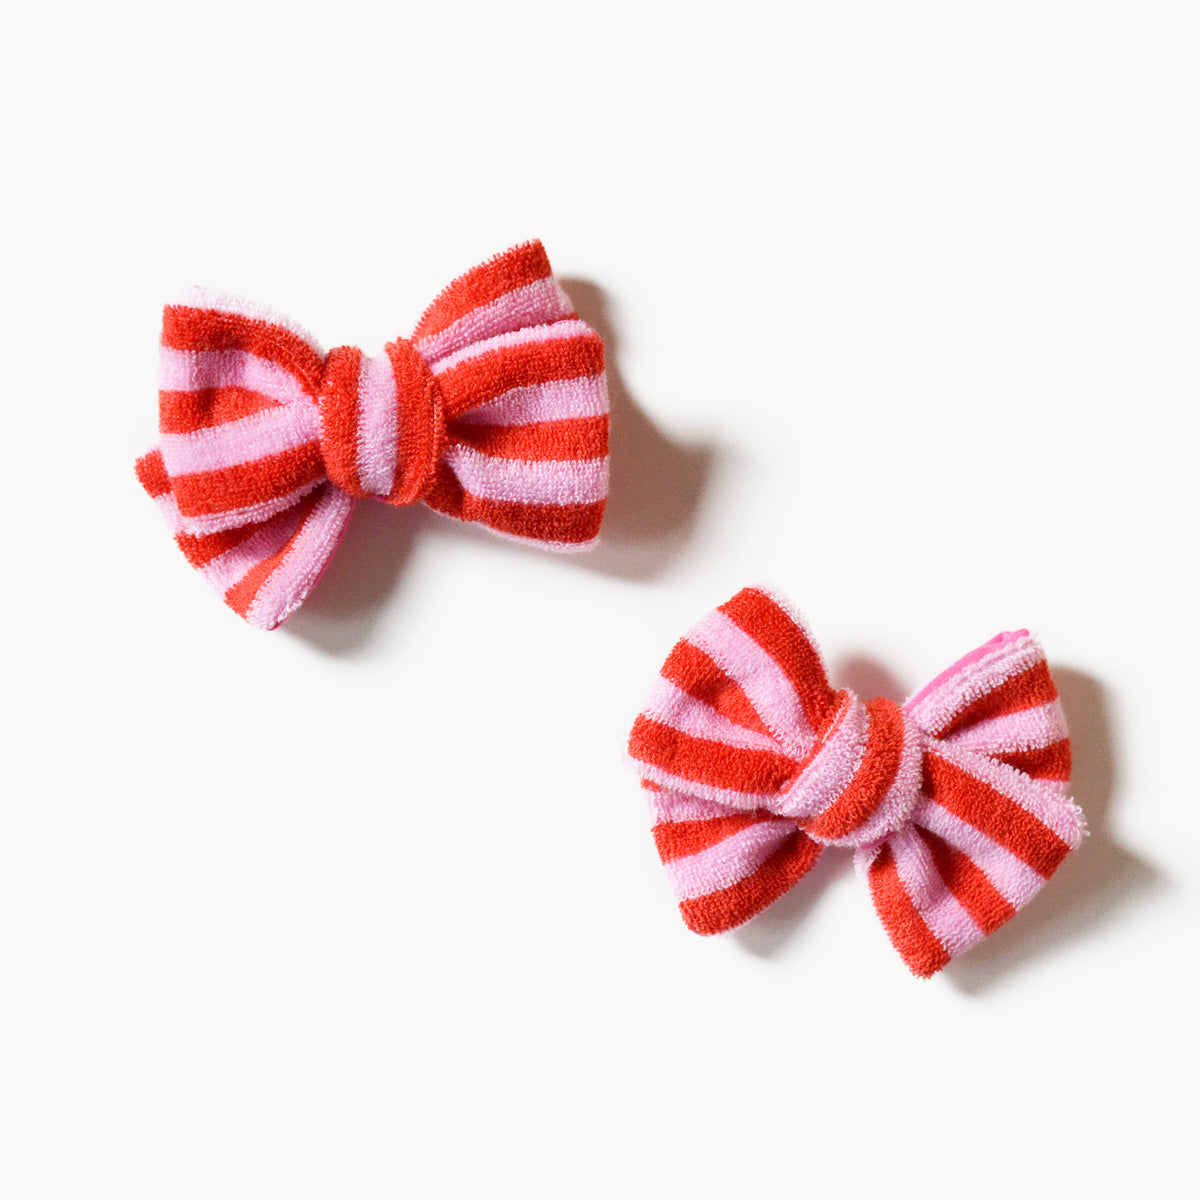 Sweet Holiday Bow Pigtail Clip Set - Christmas Gift for Girls, Holiday Hair Bows for Girls GenWoo Shop GenBow Club 